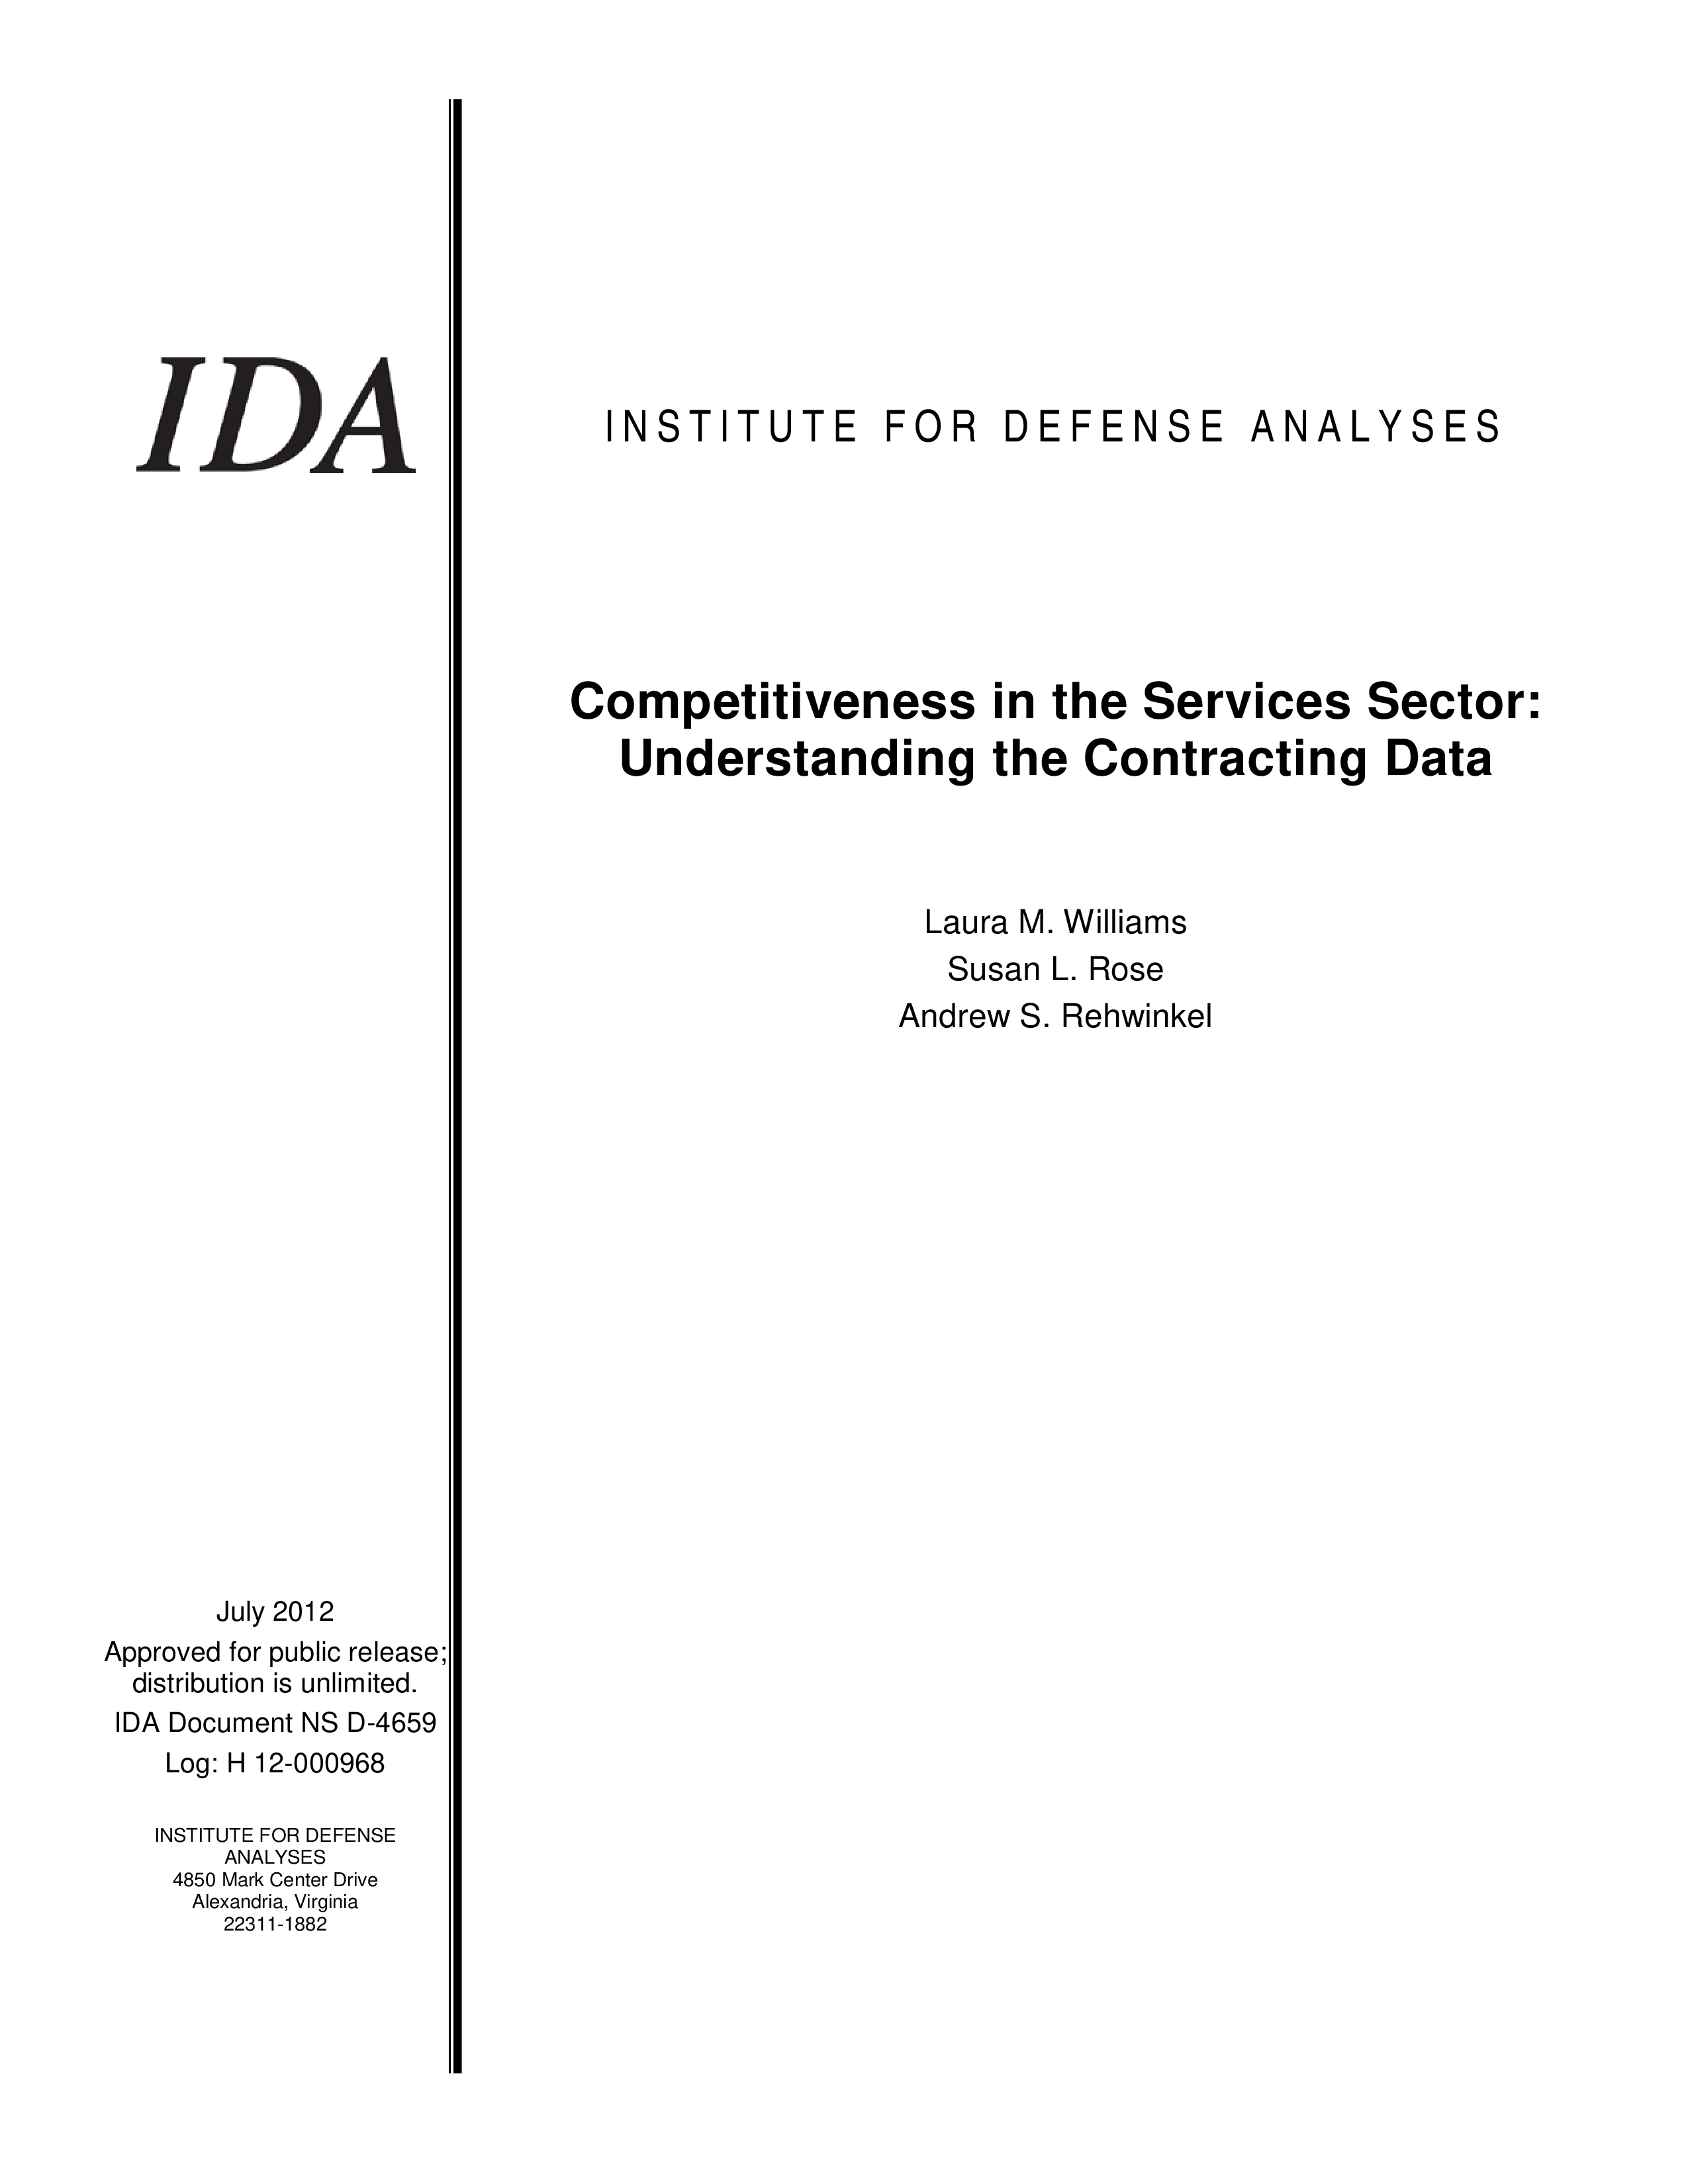 Competitiveness in Services Sector: Understanding the Contracting Data